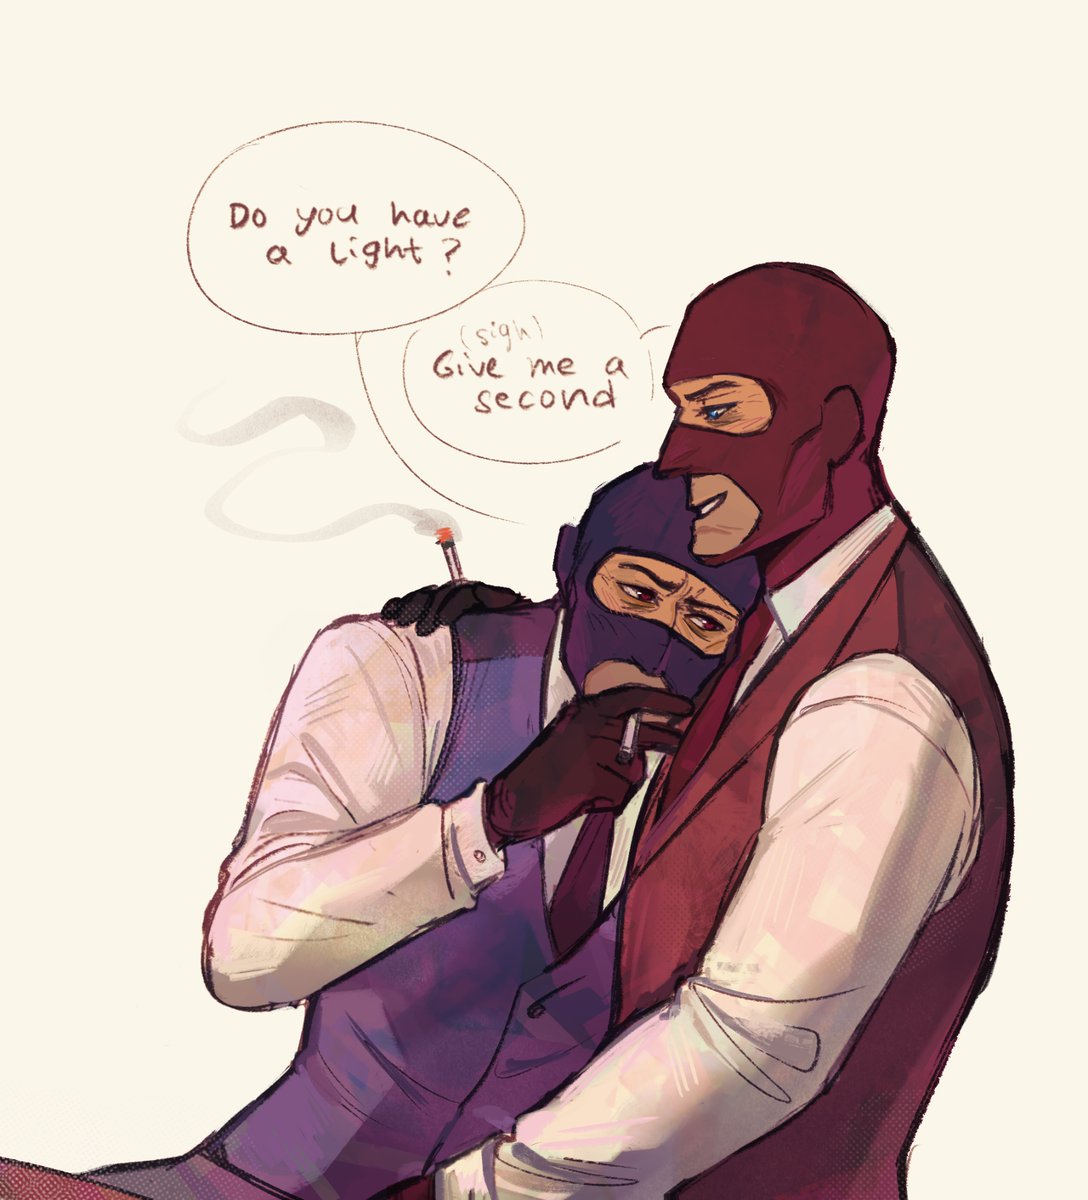 The two moods
#tf2